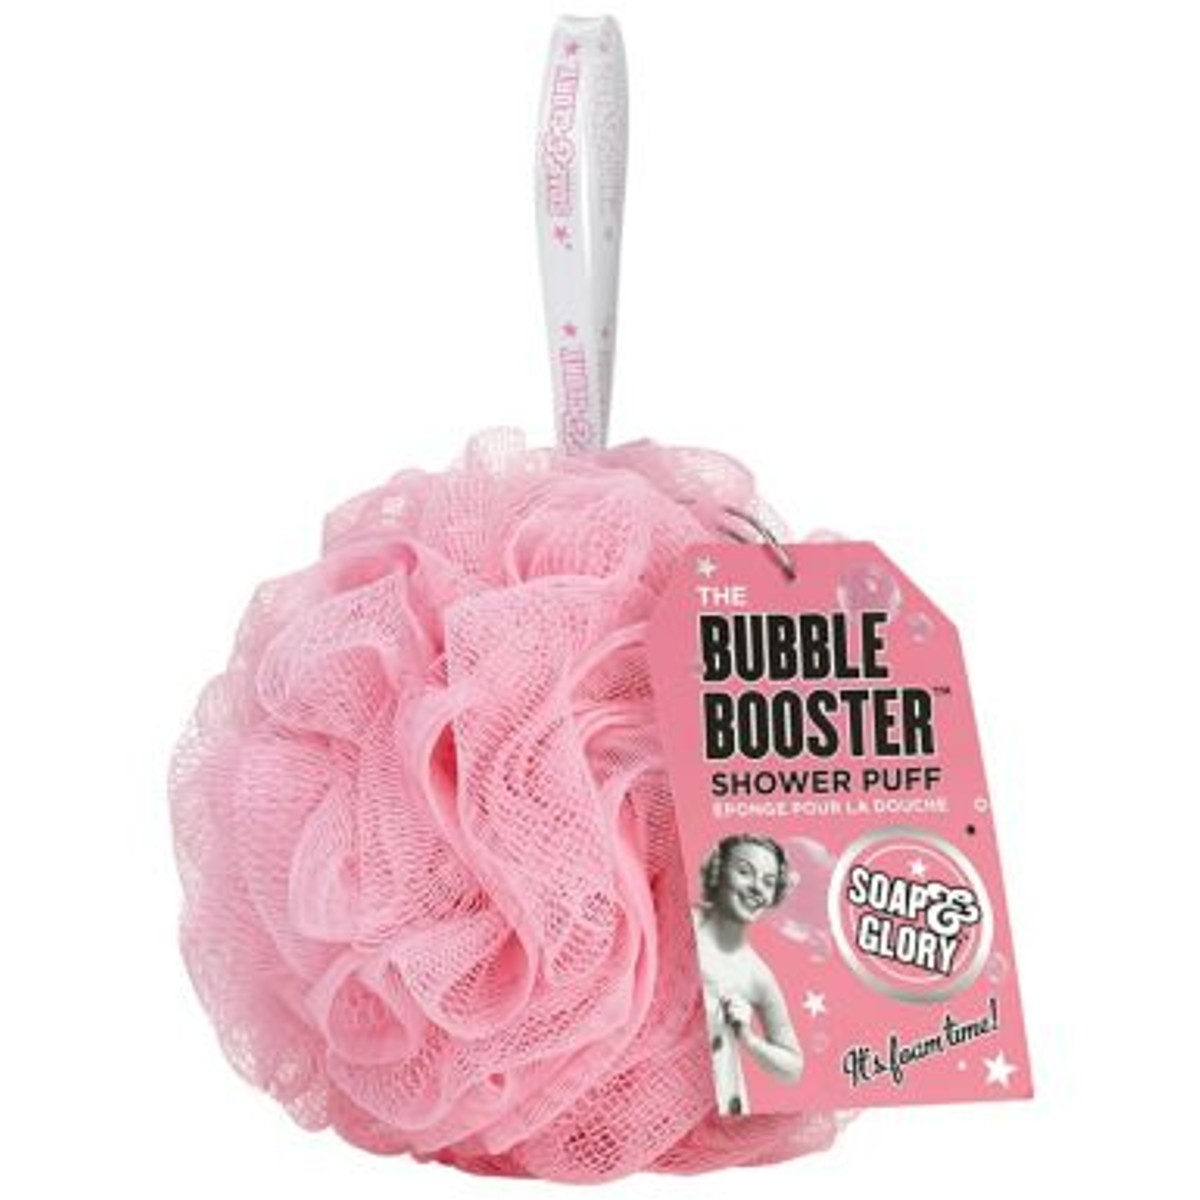 The Bubble Booster Body Shower Puff